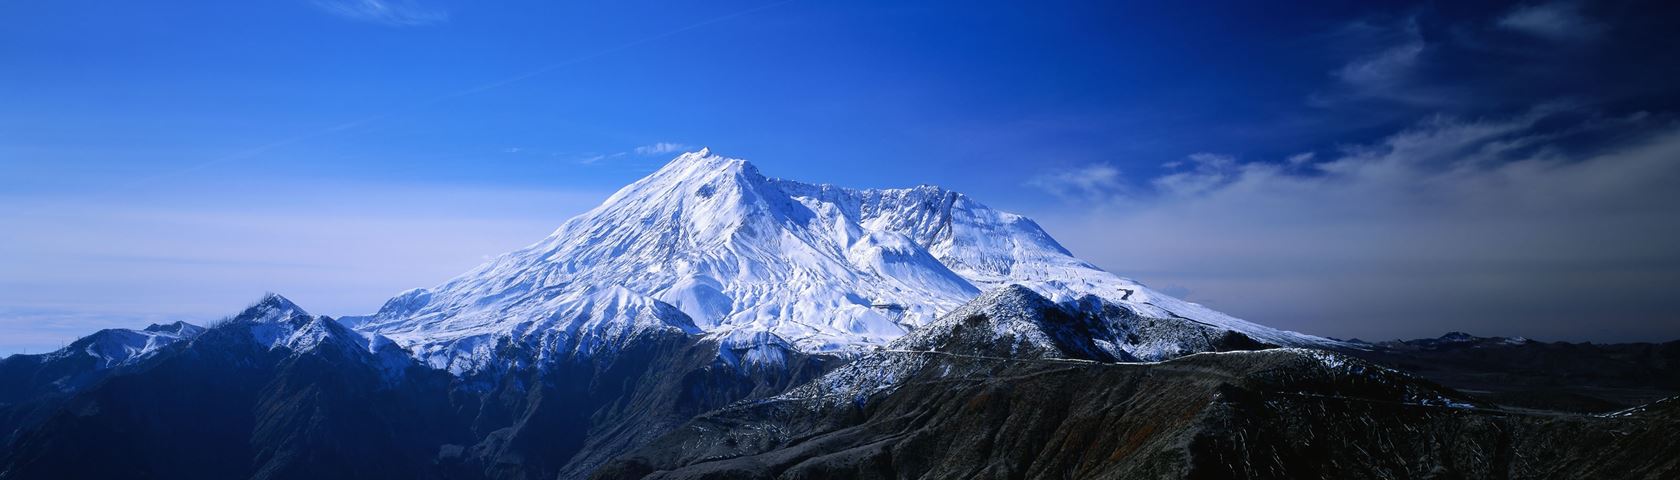 Mount saint helens â images â by binary fortress software